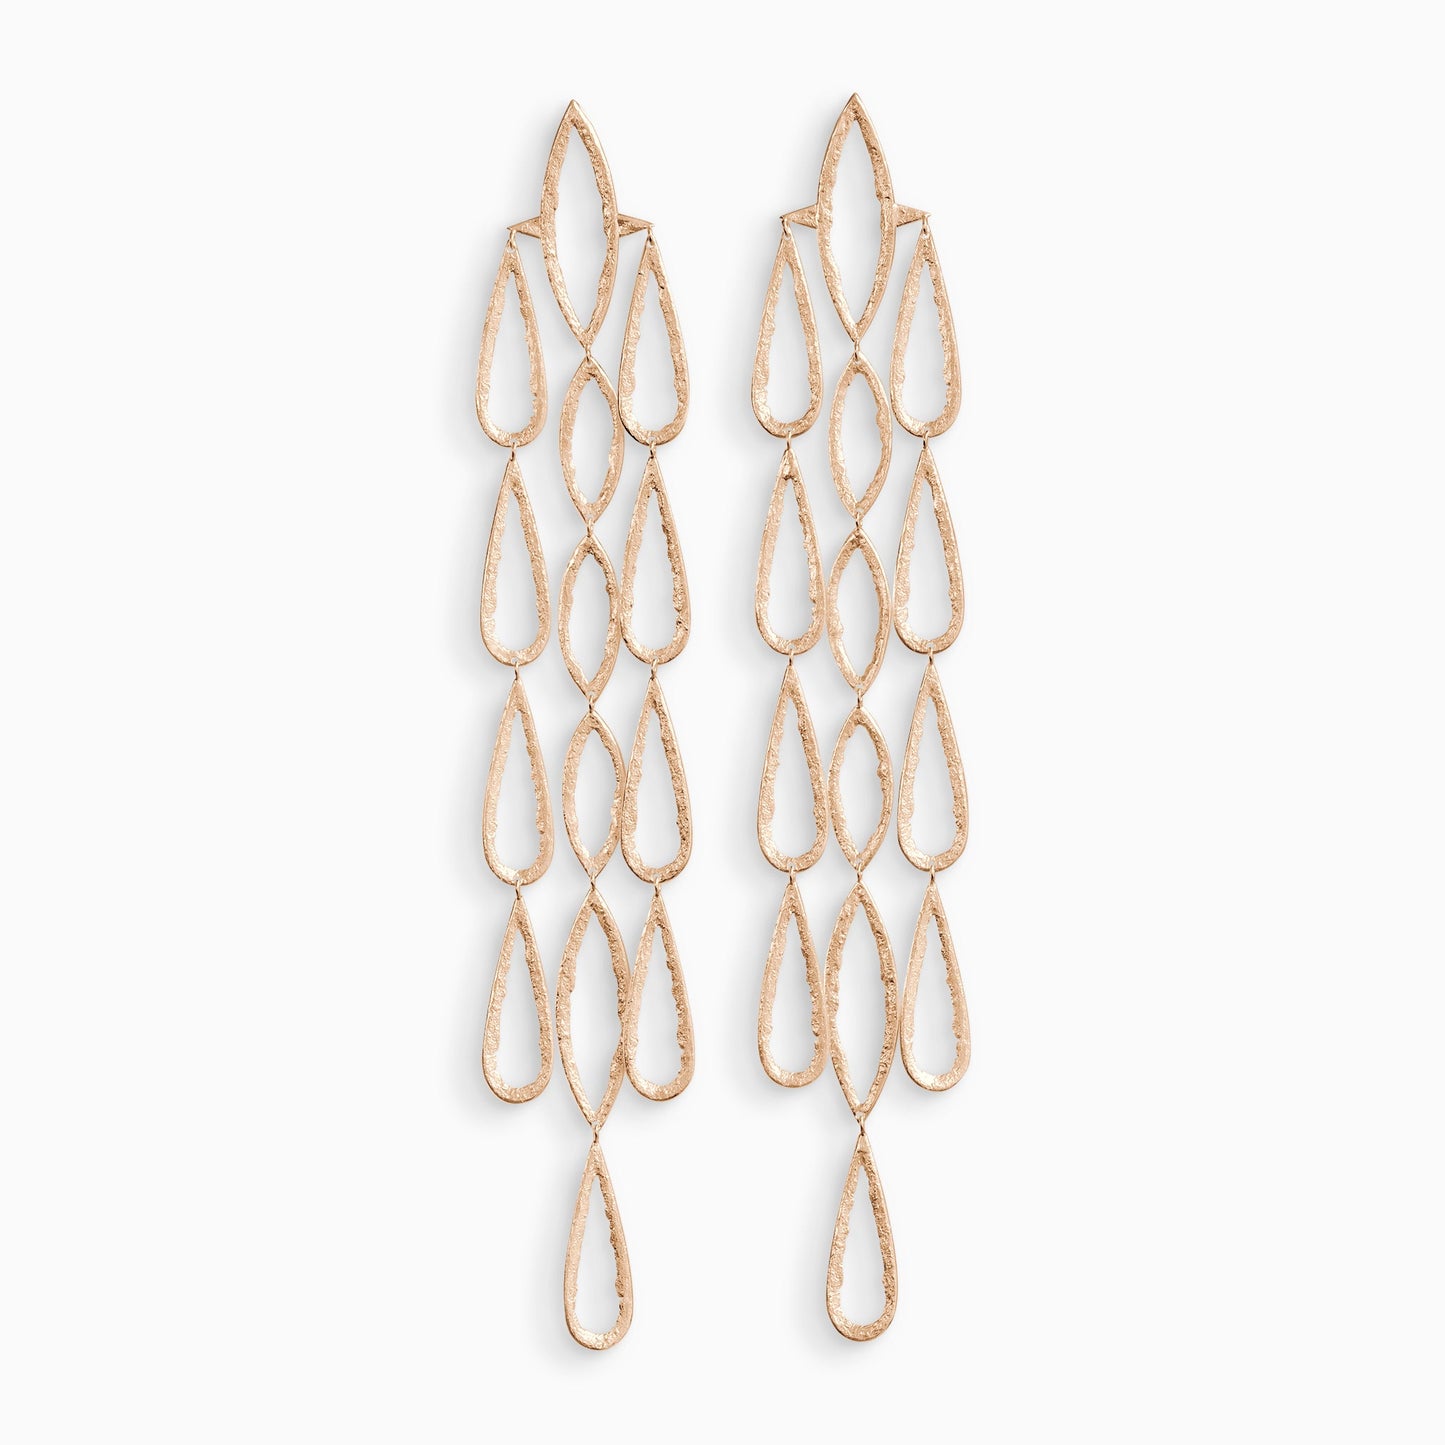 A pair of 18ct Fairtrade rose  gold drop earrings. 3 parallel lines of articulating large teardrop shapes hang from a large lozenge shapes with a stud ear fastening . These open shapes have a strong organic texture and are smooth on the outside edges with fragmented inside edges. 192mm length. 32mm width.